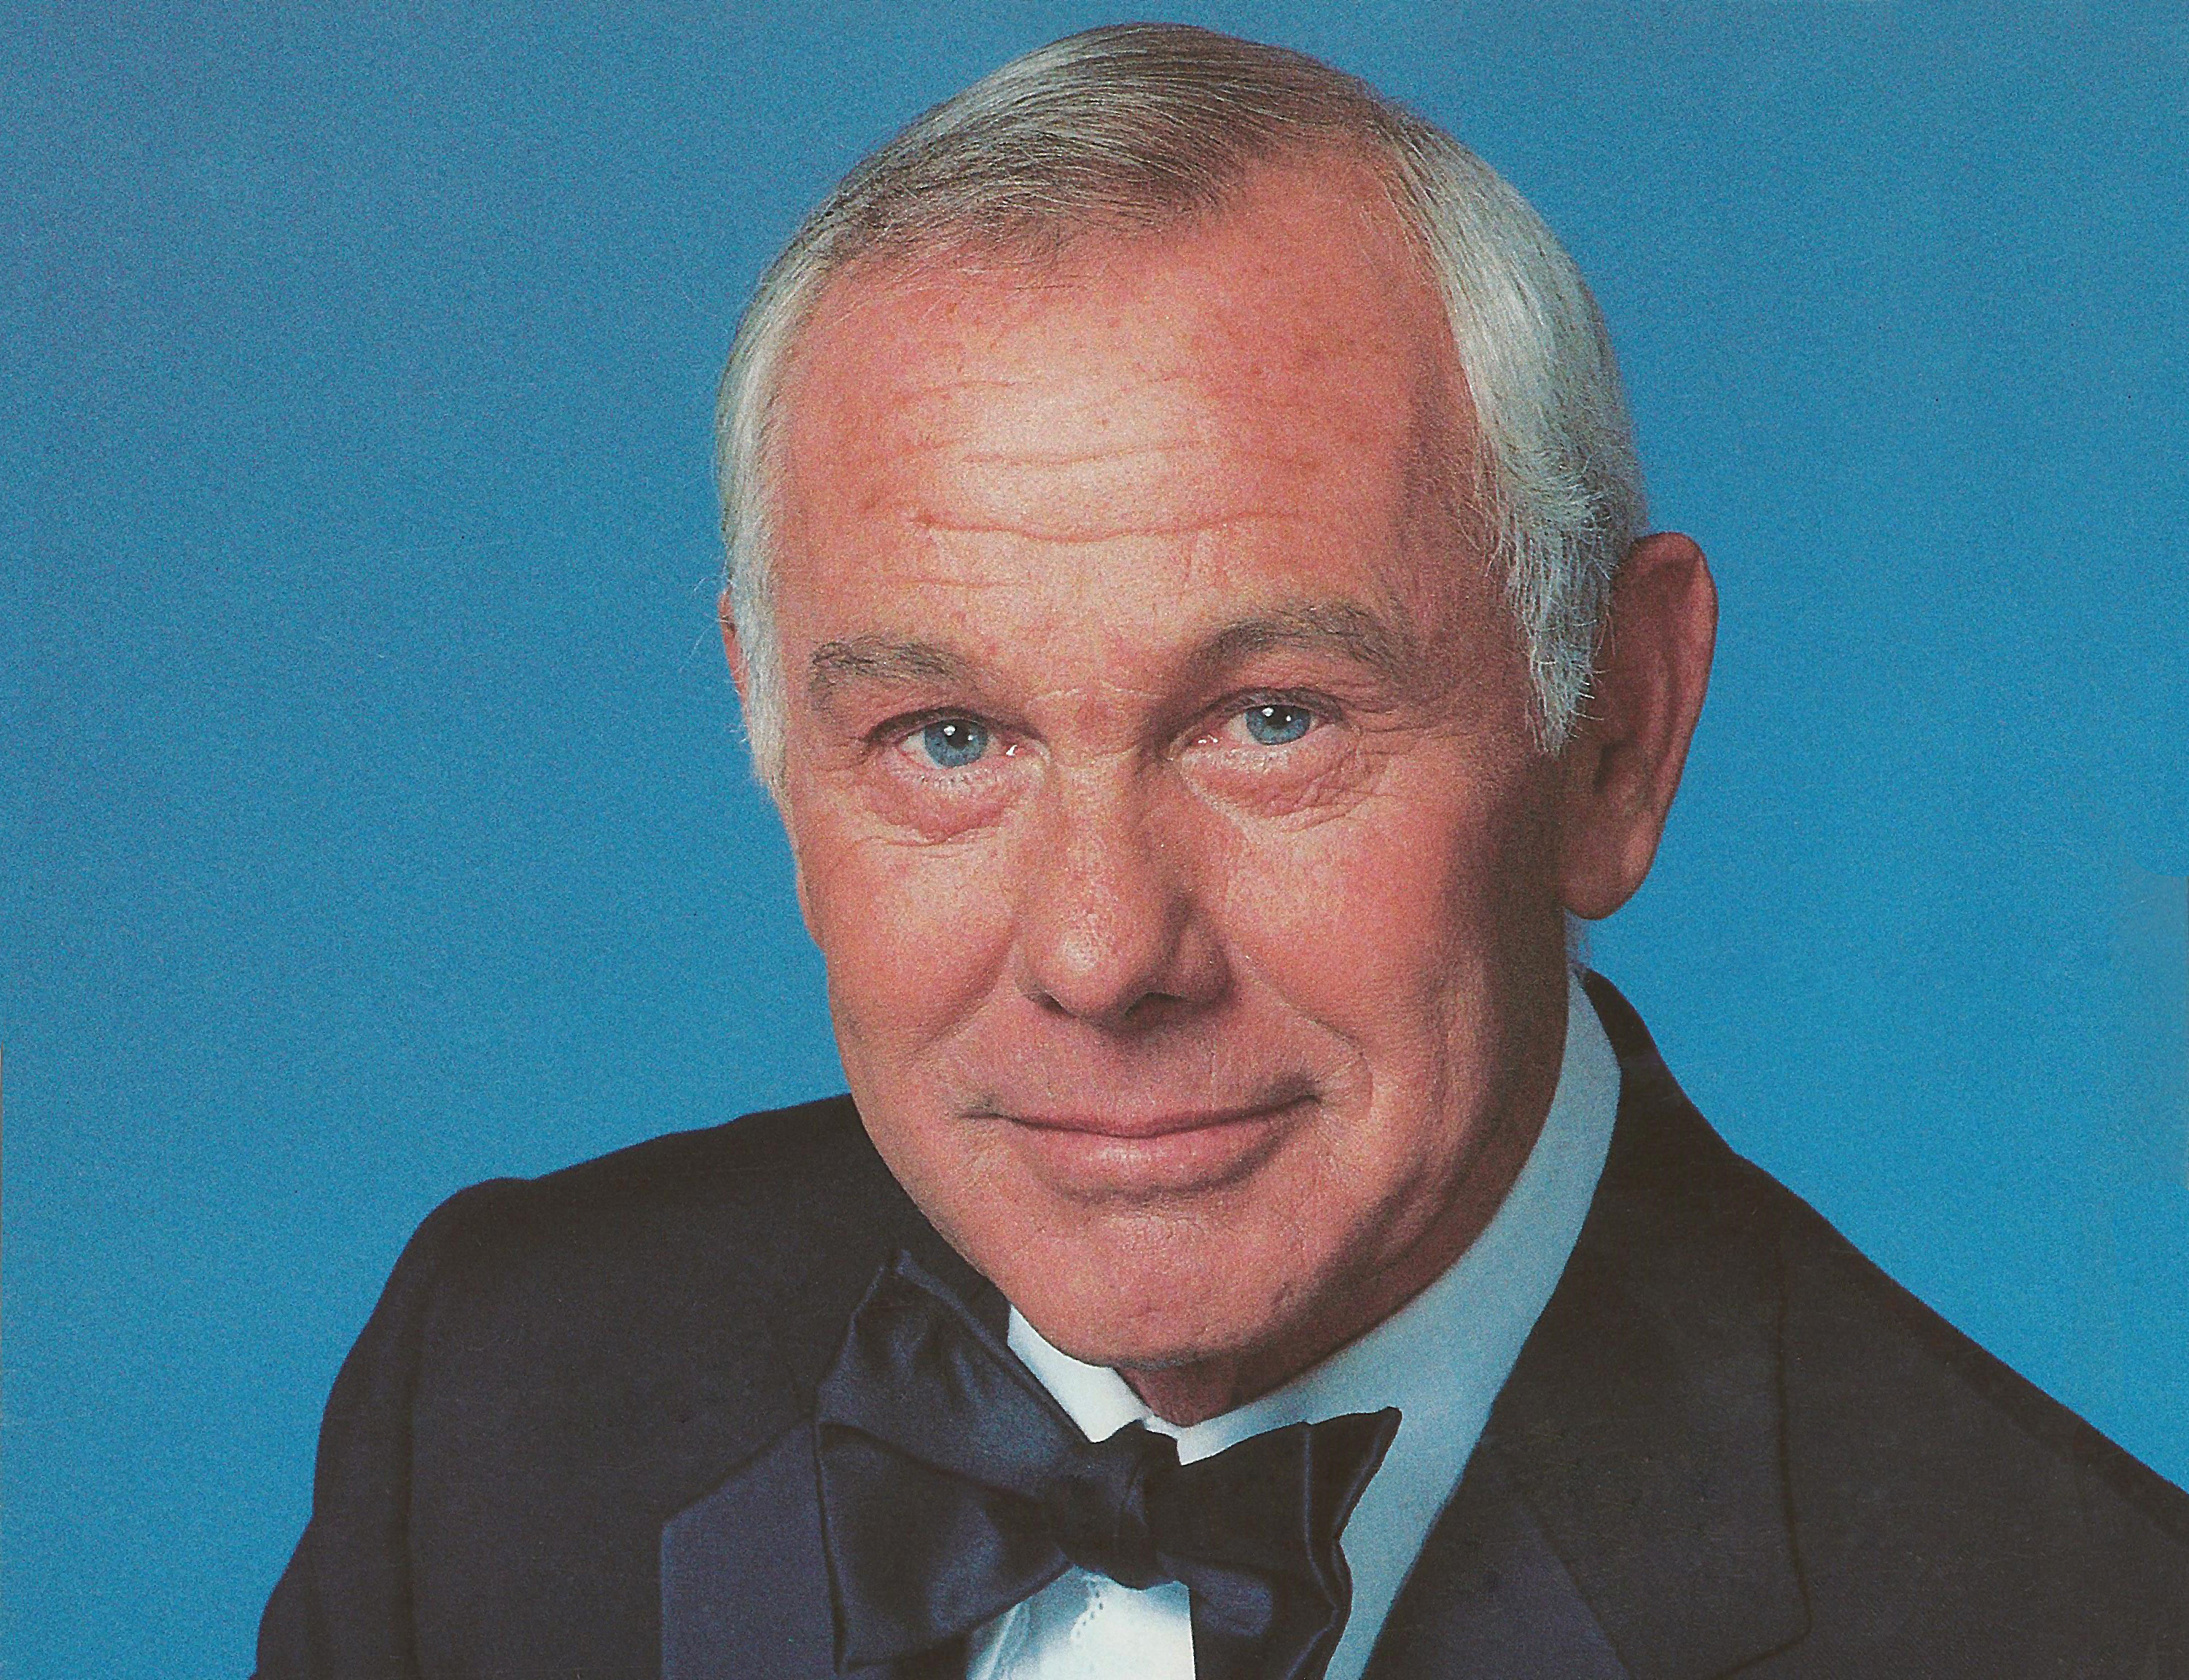 A $5 million gift from the Johnny Carson Foundation is expected to provide scholarships to 50-60 students annually totaling approximately $300,000 in aid through the Johnny Carson Foundation Opportunity Scholarship Fund.